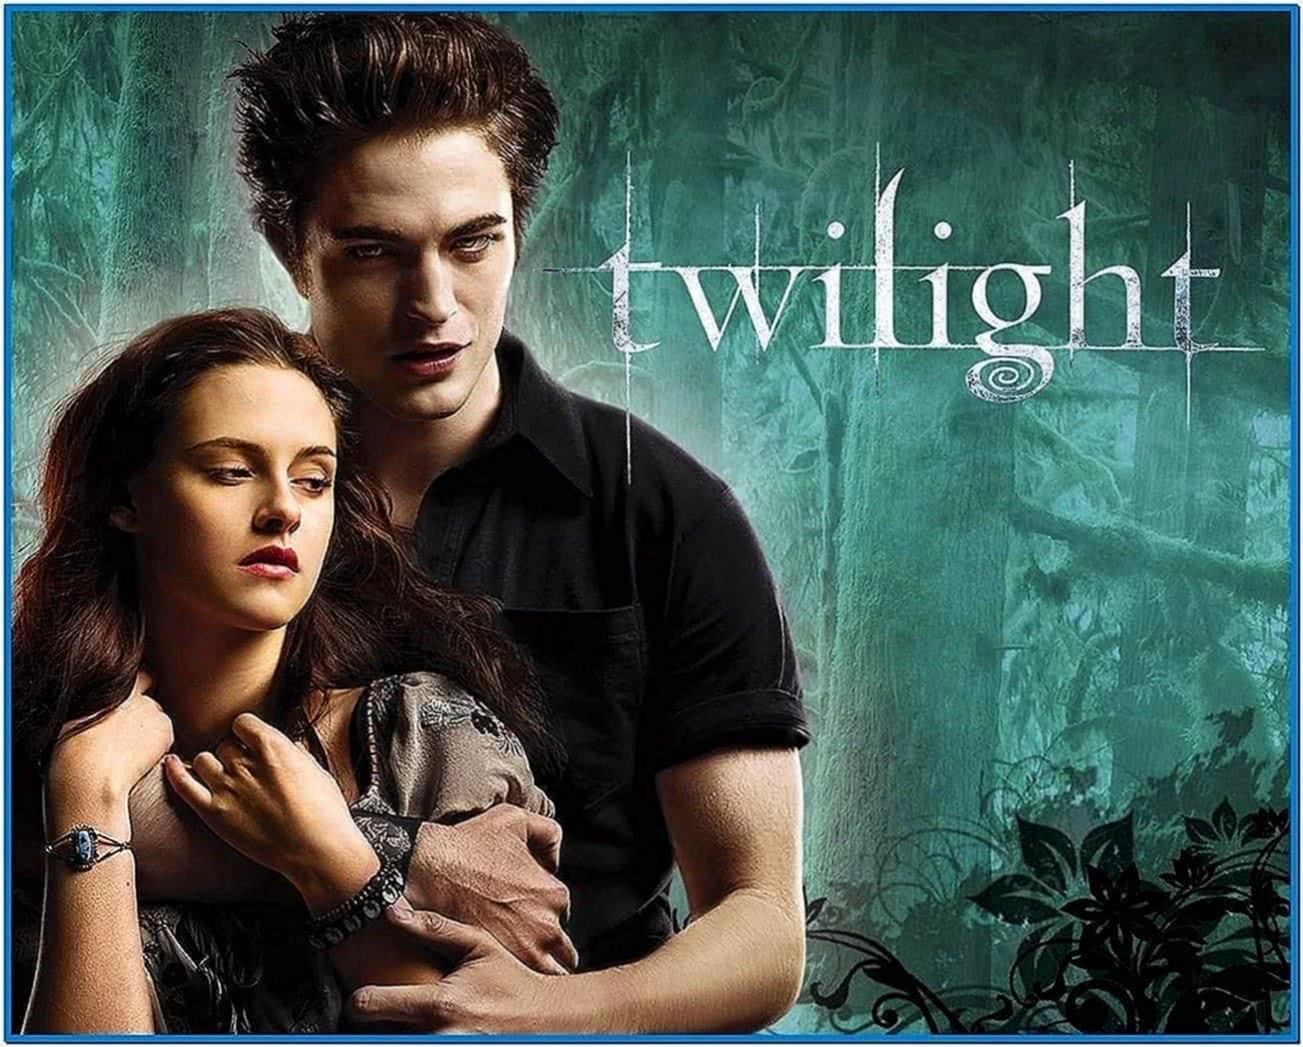 Twilight Screensavers and Backgrounds